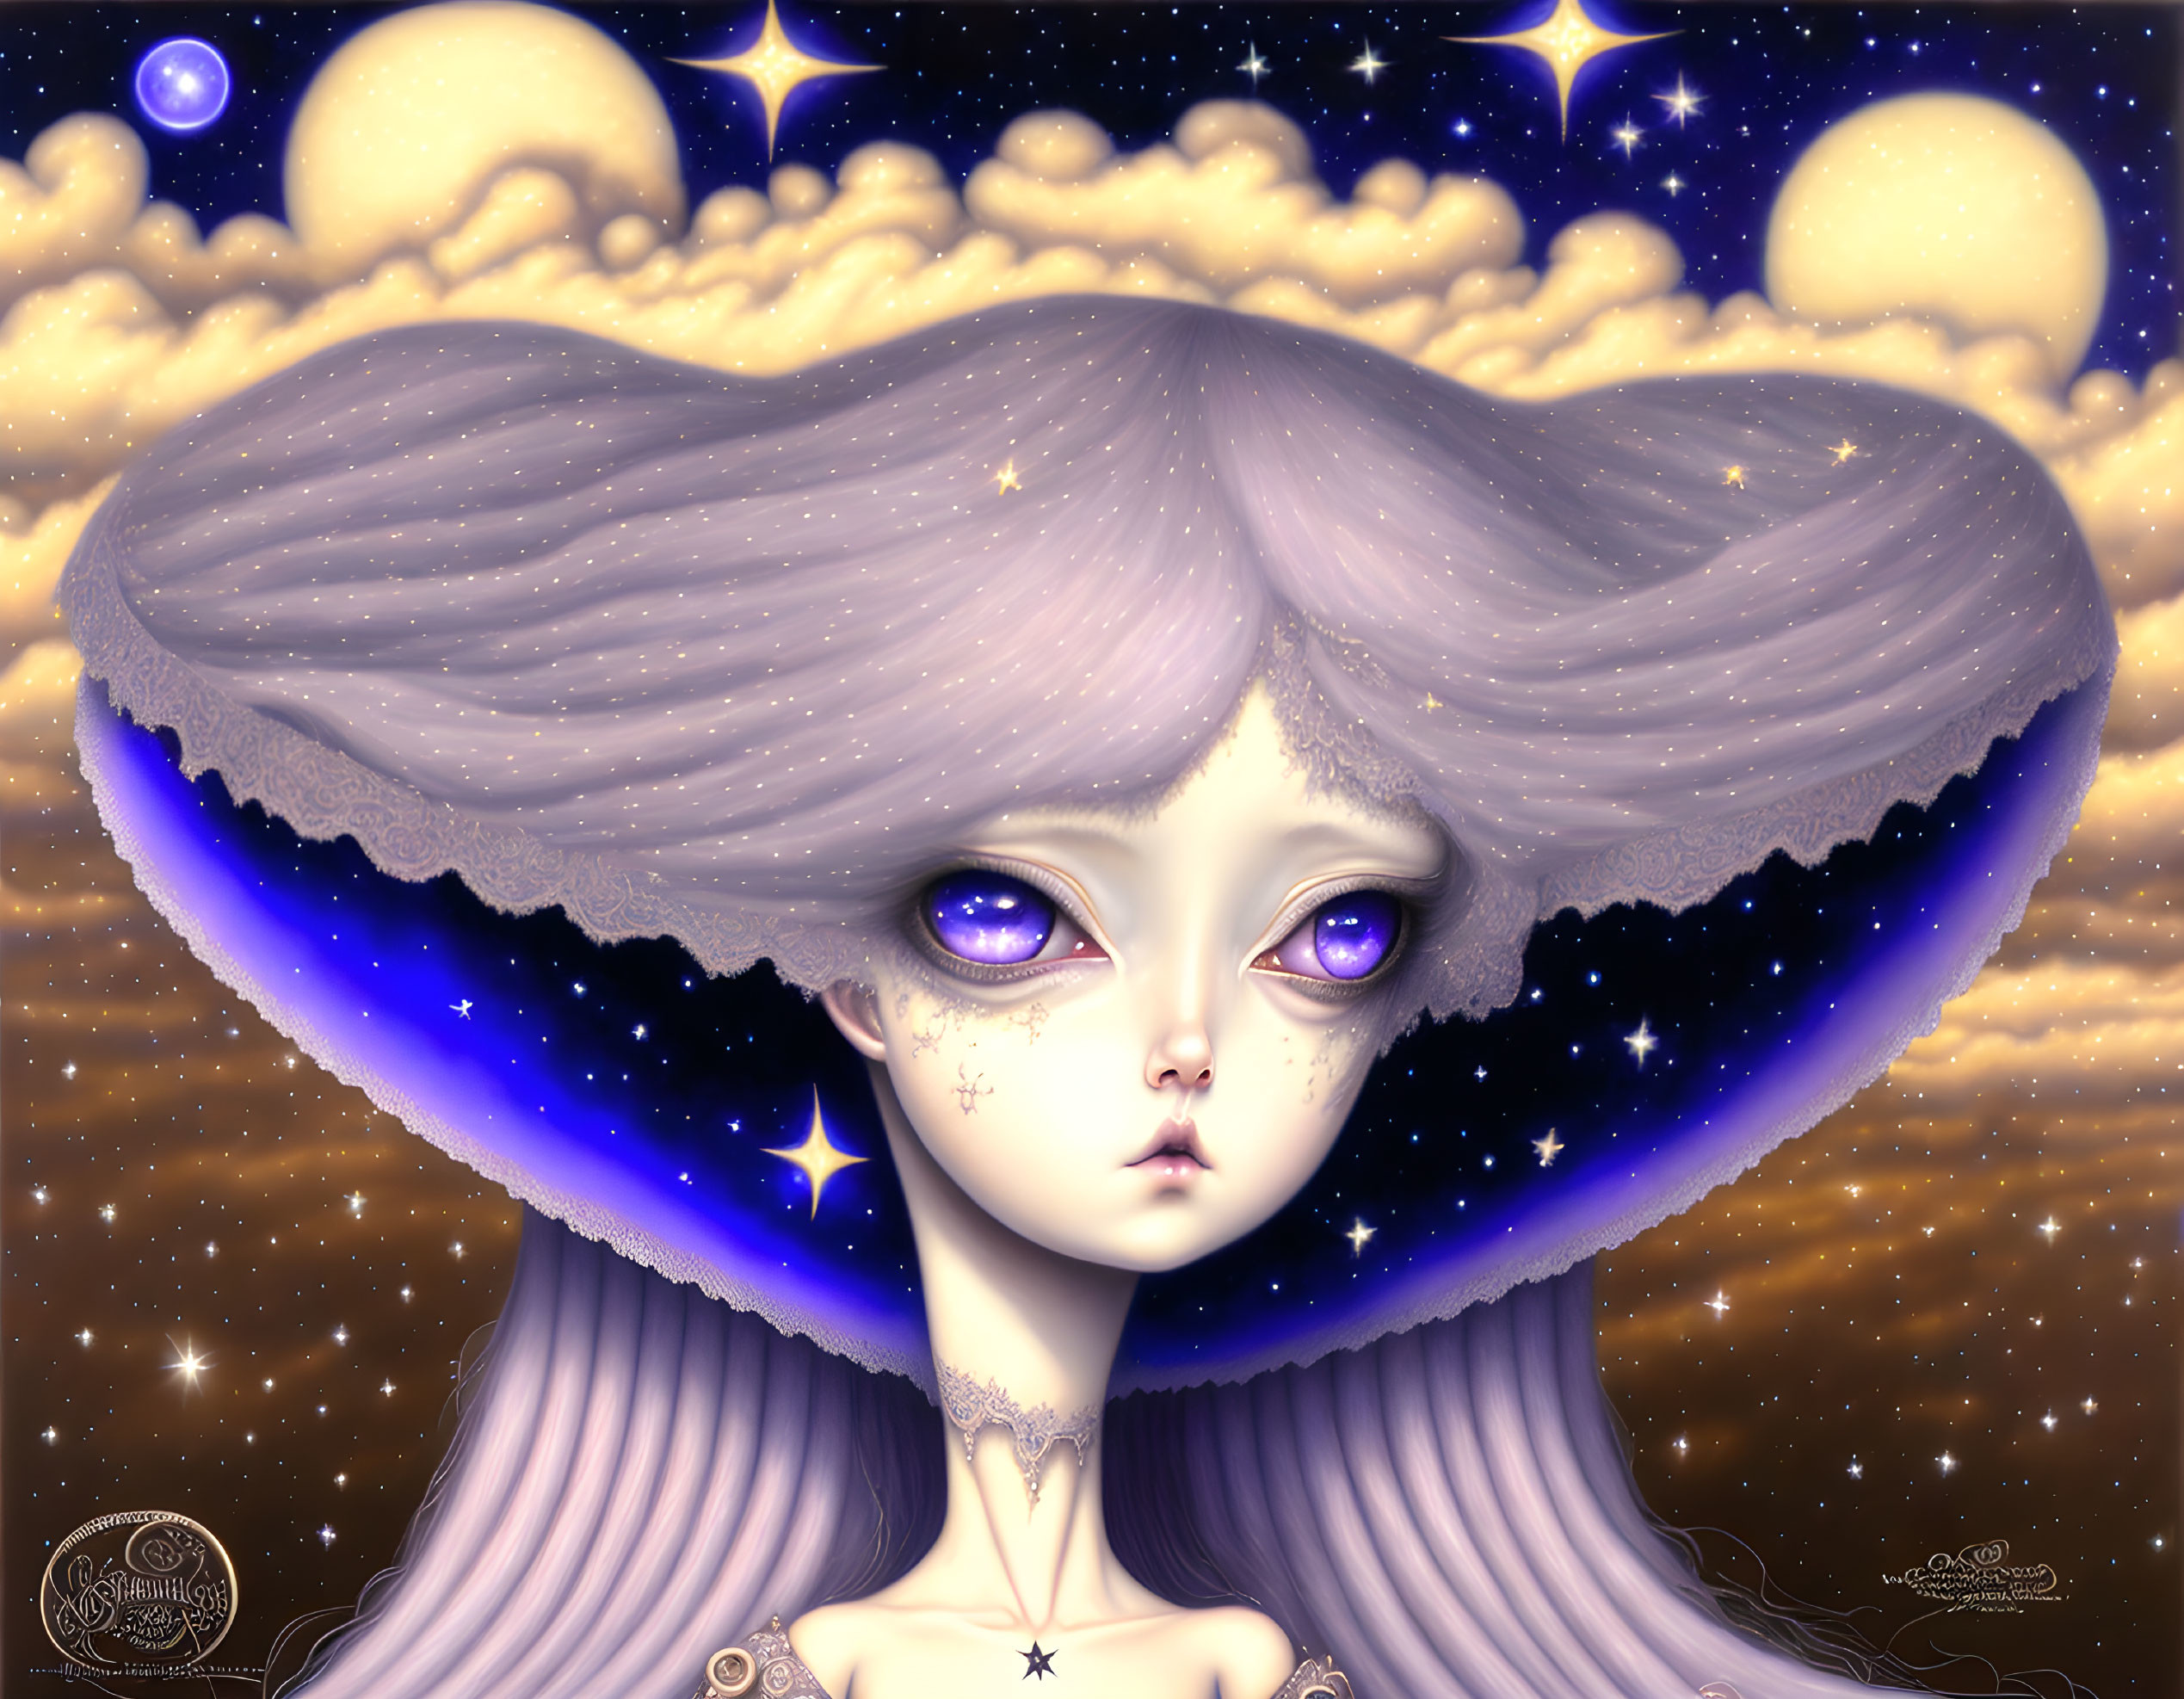 Character with Large Purple Eyes and Mushroom Cap in Starry Night Sky